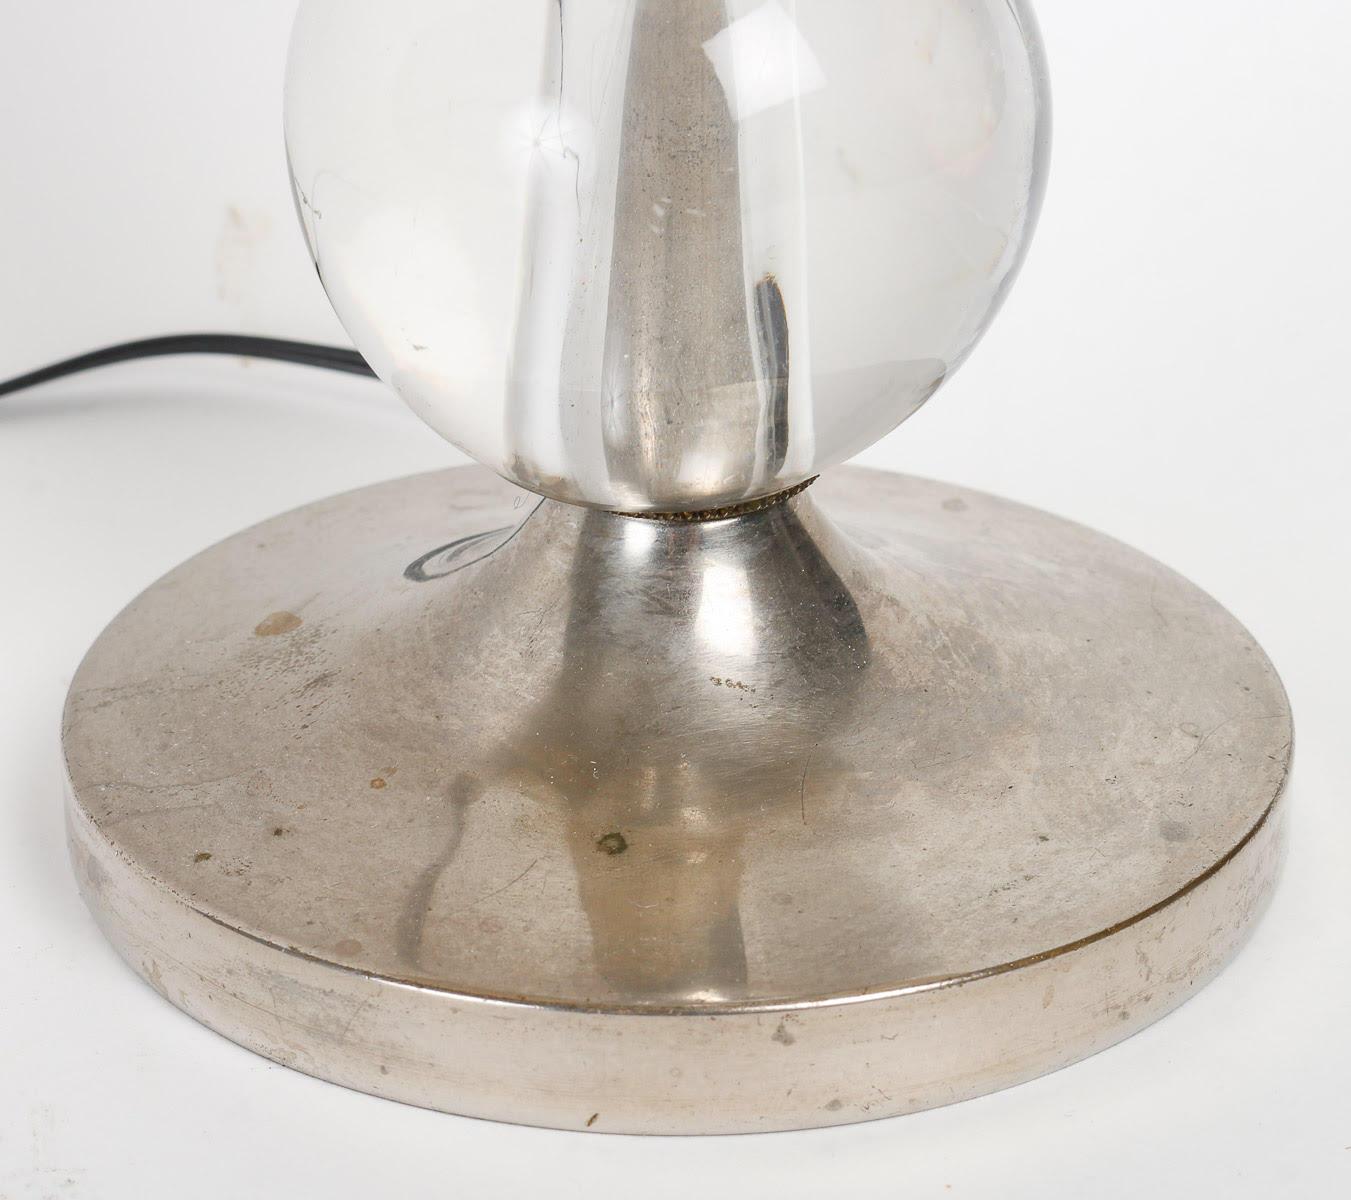 Plated Table Lamp by Adnet, Circa 1930, Art Deco Period.